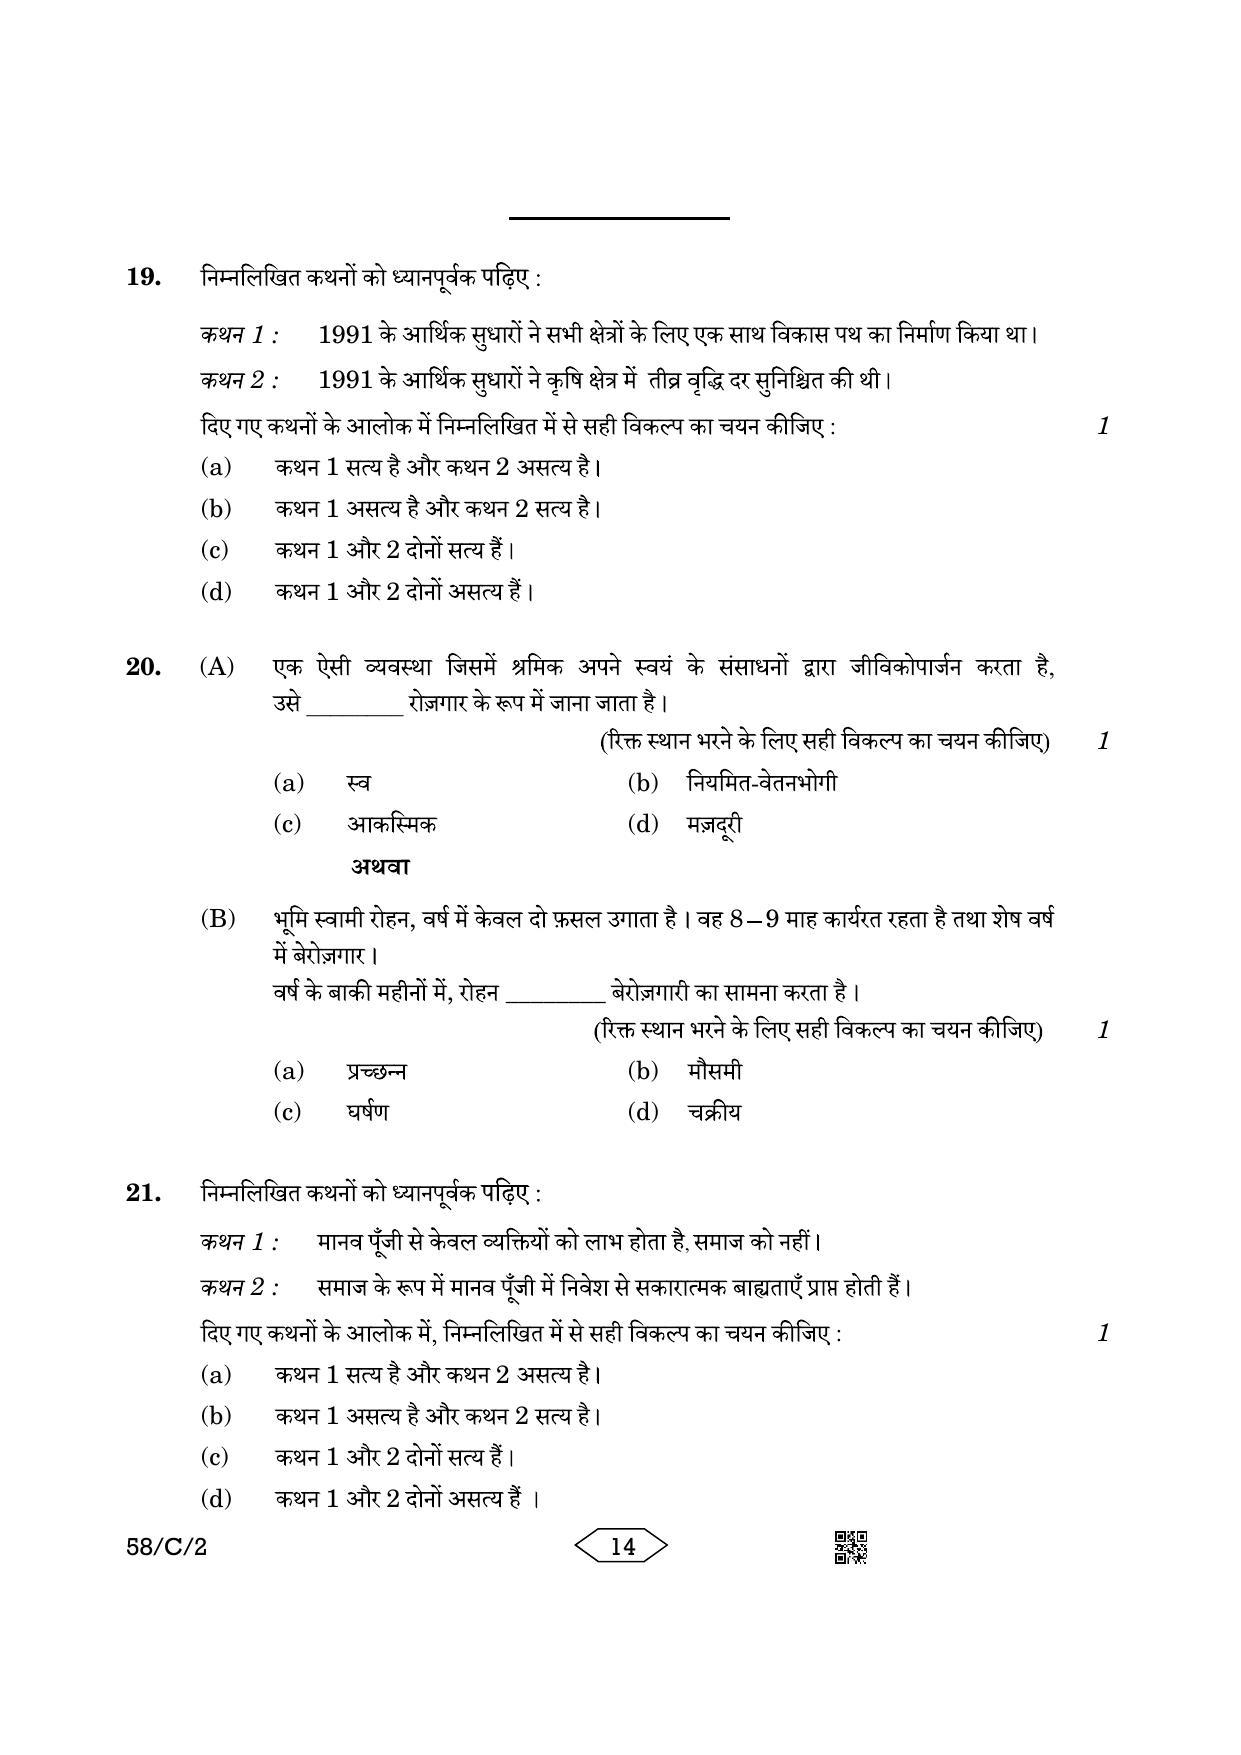 CBSE Class 12 58-2 Chemistry 2023 (Compartment) Question Paper - Page 14